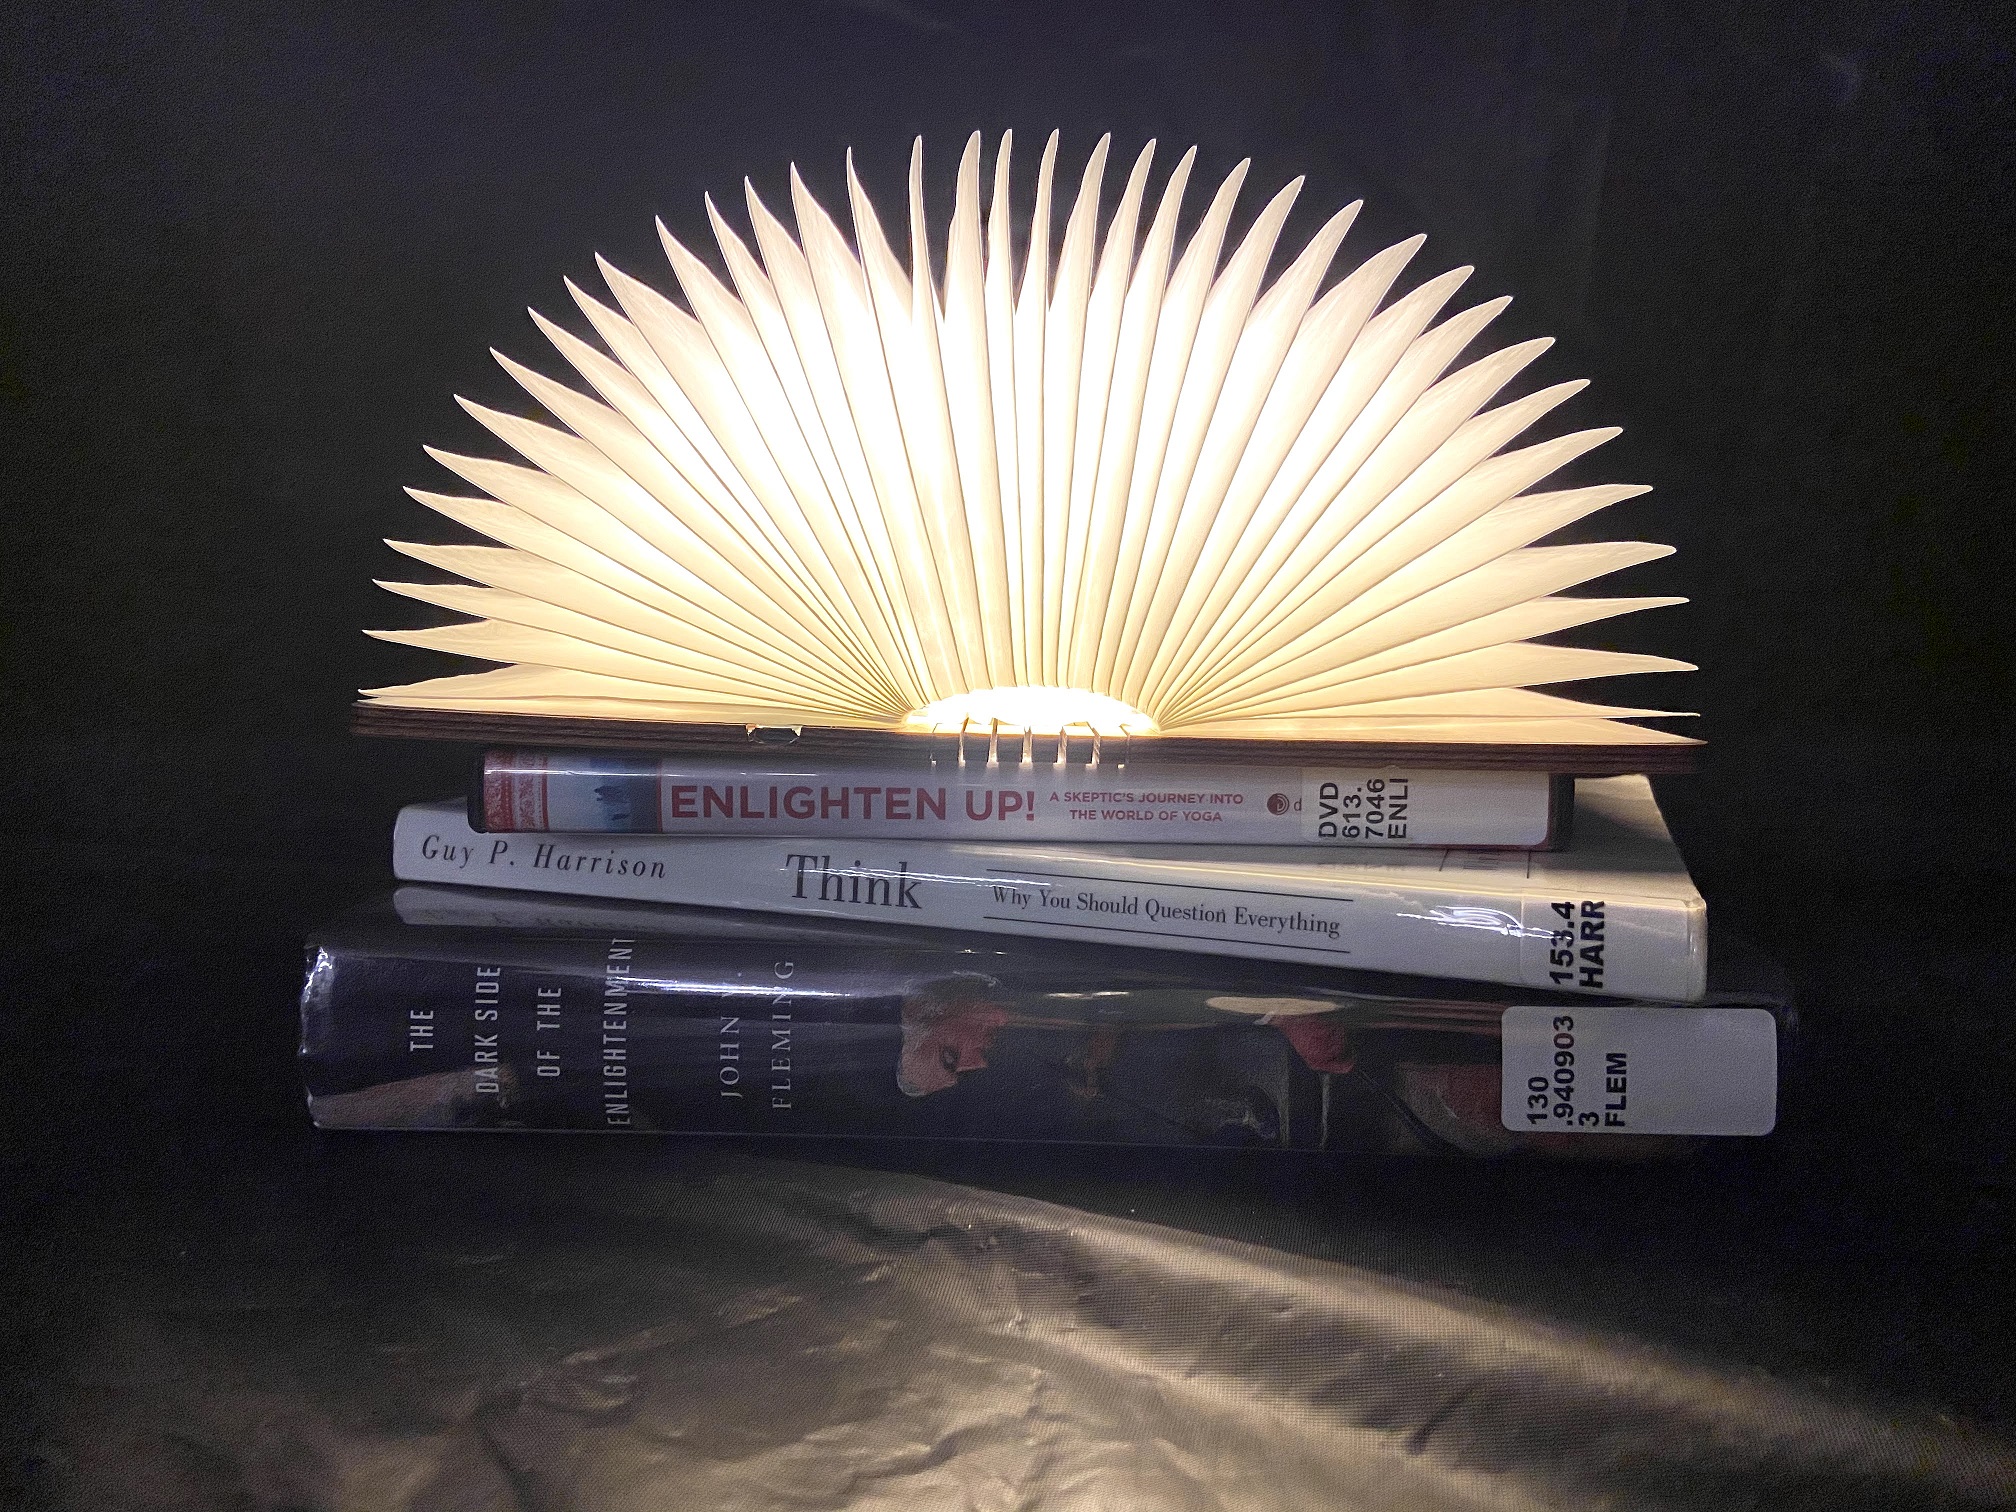 A lamp in the shape of an open book, its pages glowing. It sits on top of a DVD called Enlighten Up, a book called Think by Guy P Harrison, and a book called The Dark Side of the Enlightenment by John Fleming